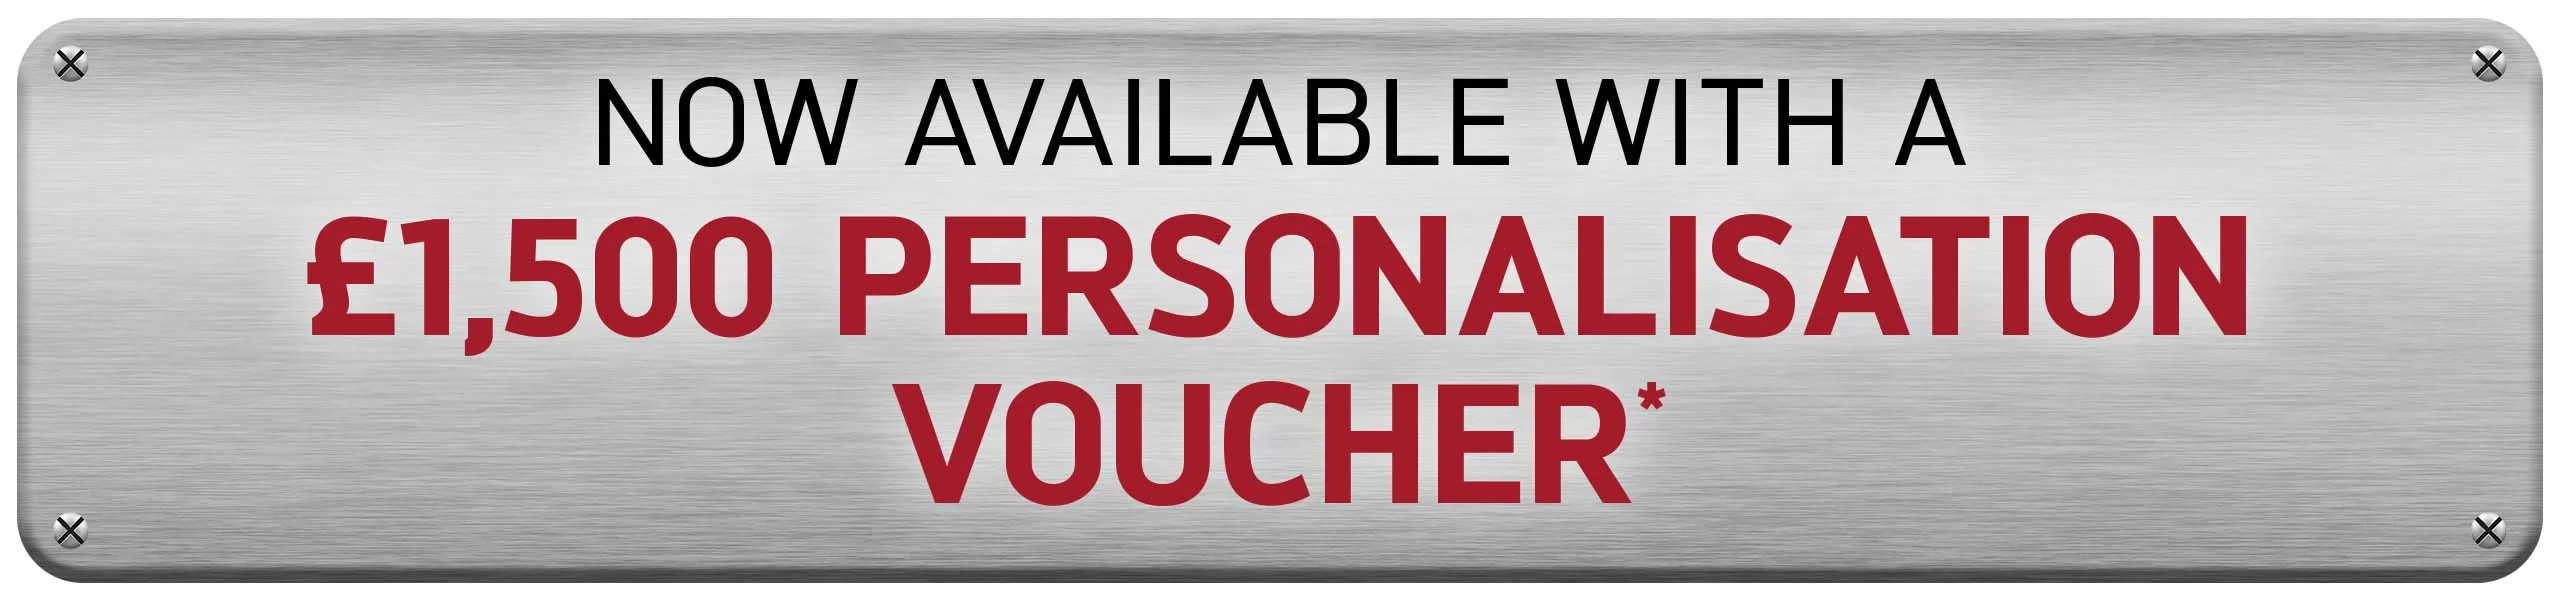 Now available with a £1,500 Personalisation Voucher